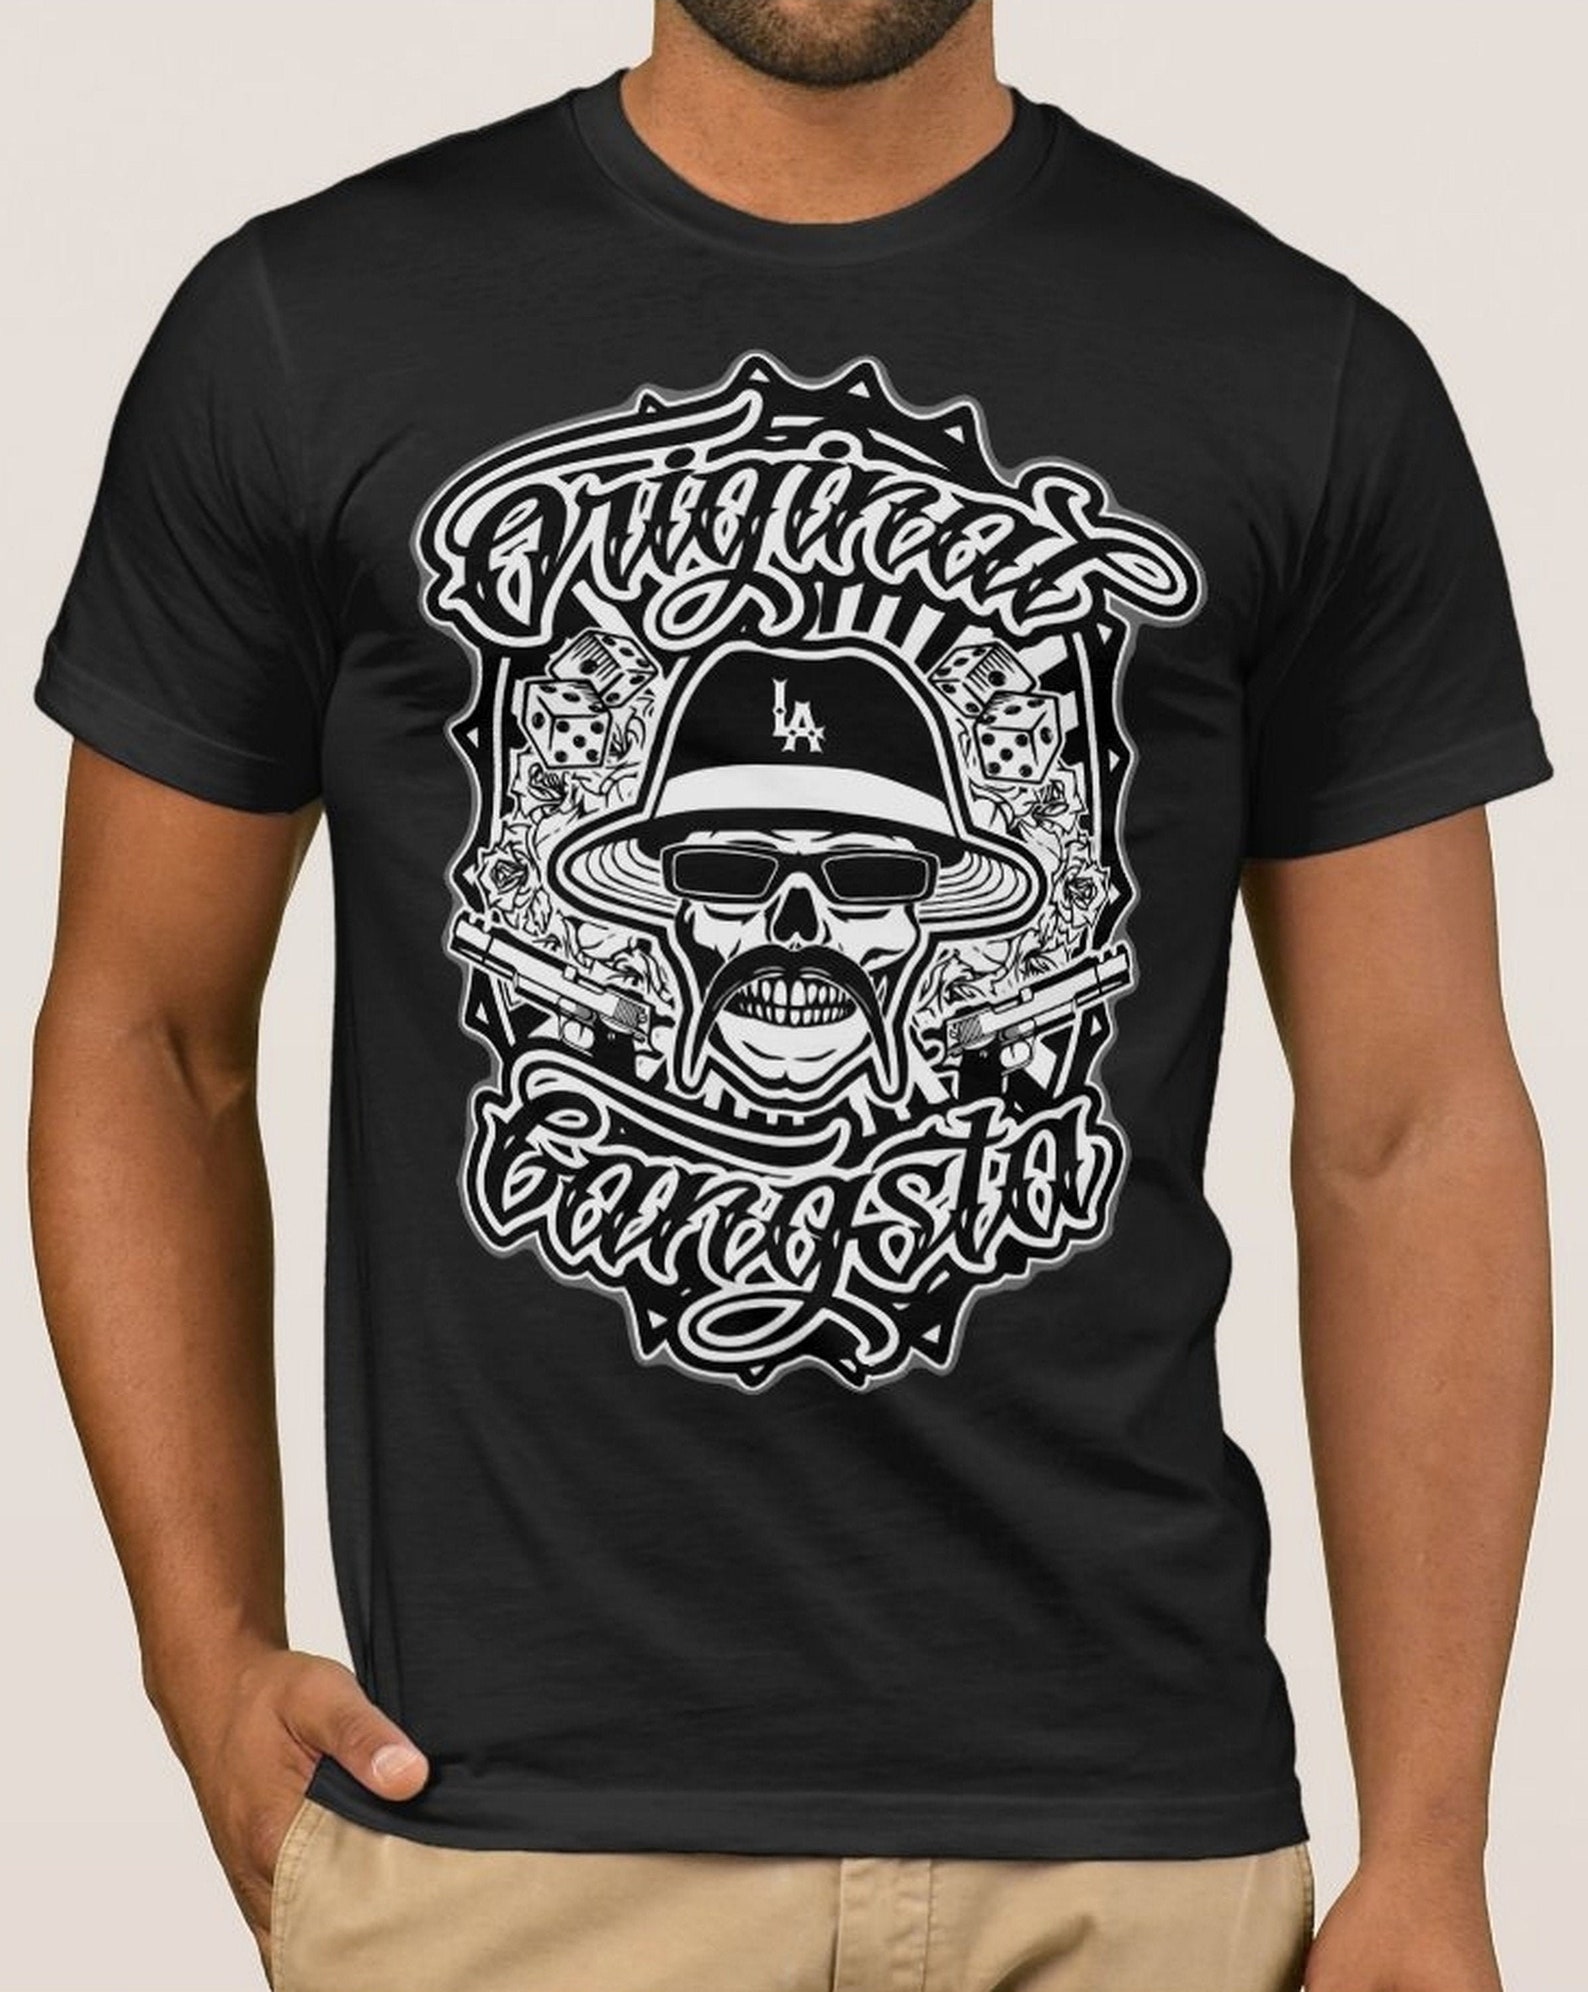 Gangsta T Shirt Gangster Gangsters Chicano Cholo Vato Loco Mexican